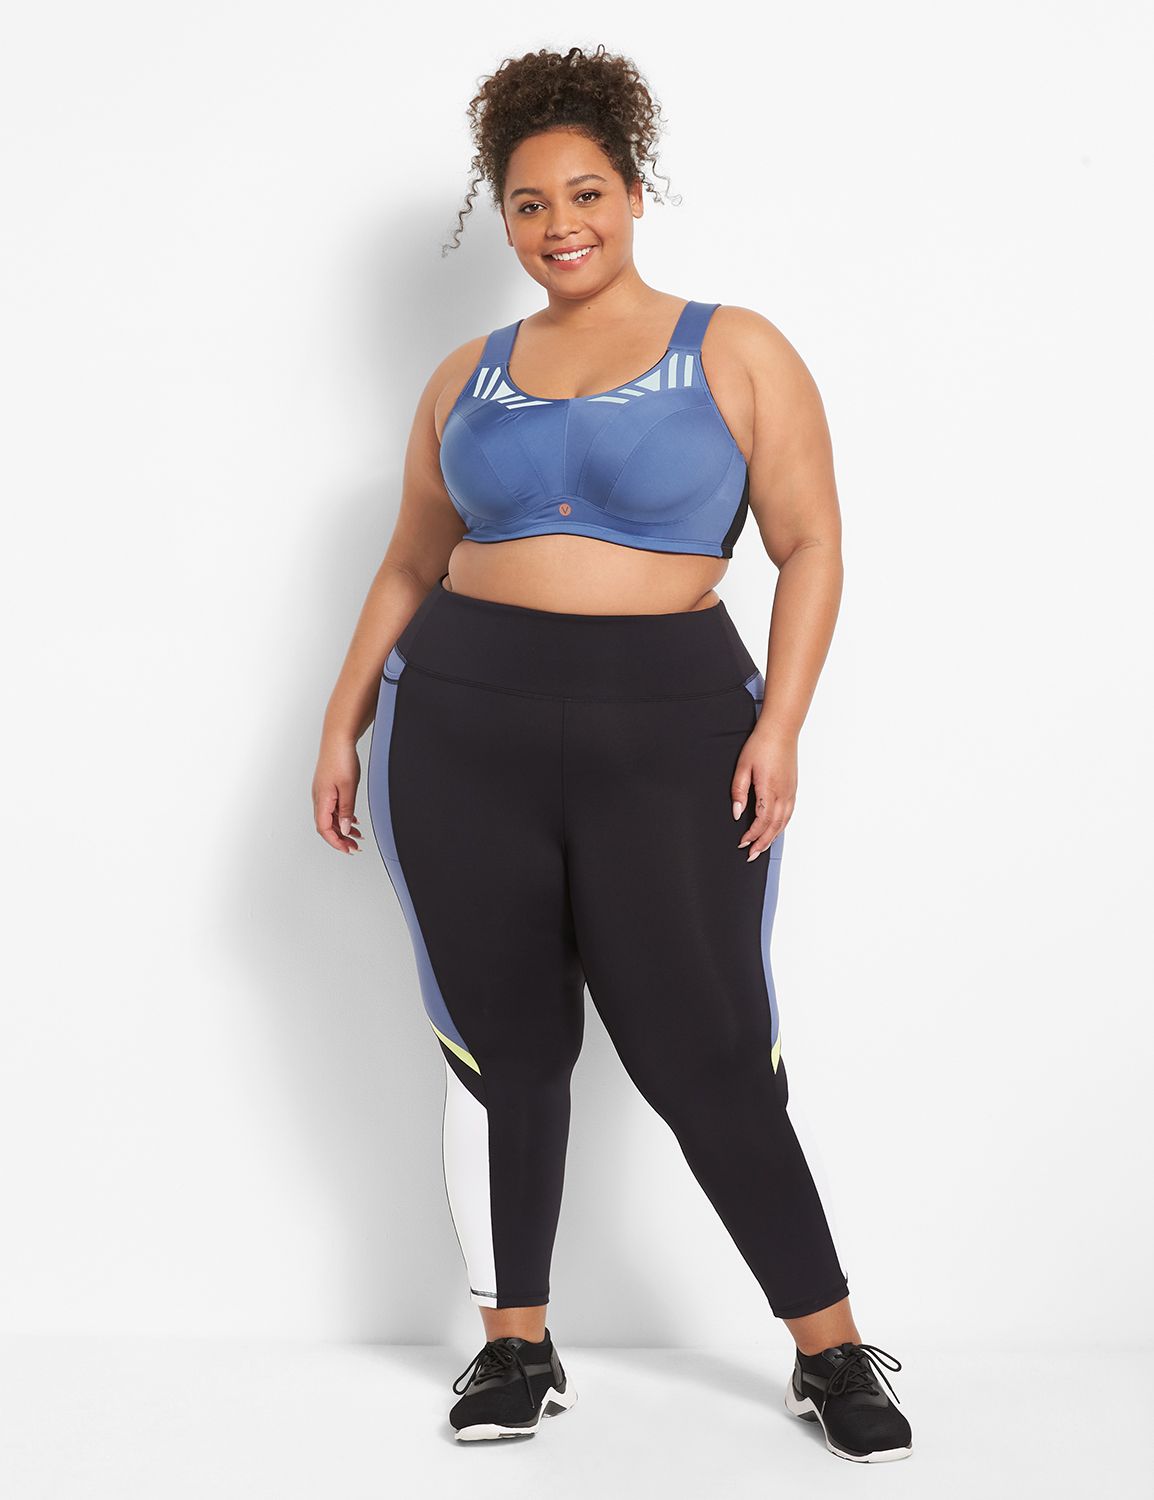 Lane Bryant Livi Active High-Impact Wicking Max Support Sports Bra -  ShopStyle